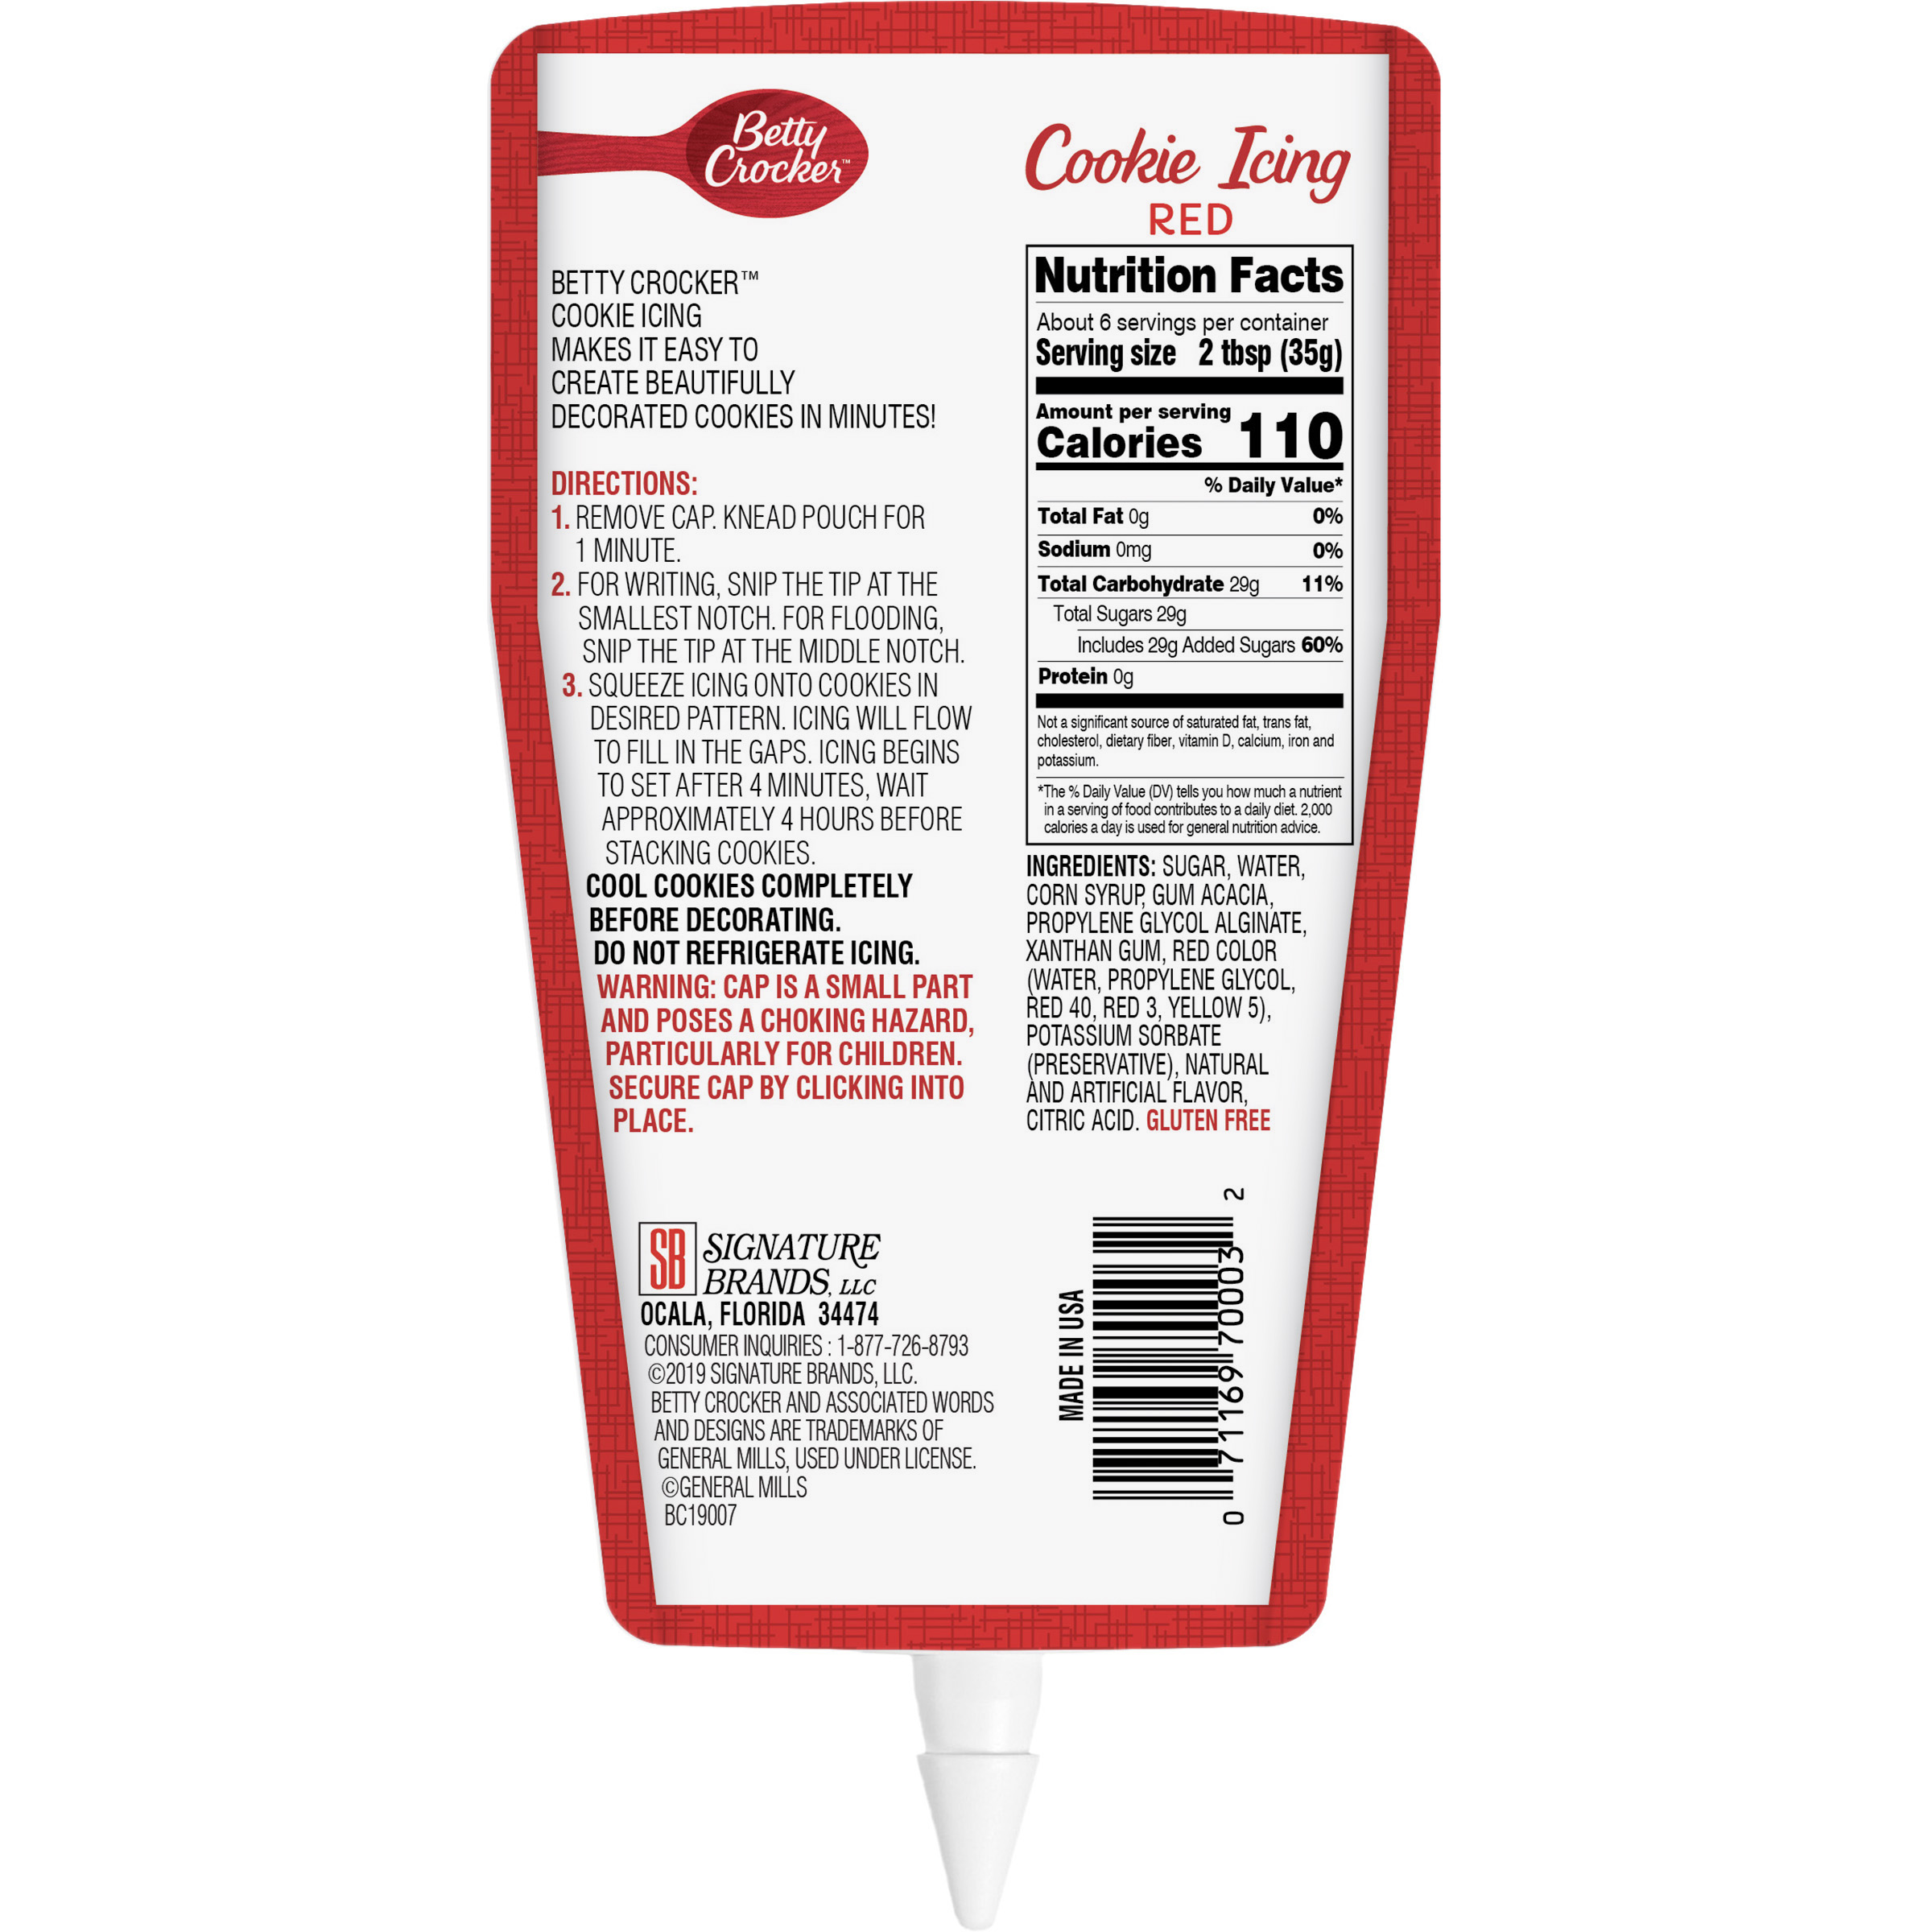 Betty Crocker Red Cookie Decorating Icing, Vanilla Flavor, 7 Ounce Pouch - image 2 of 5